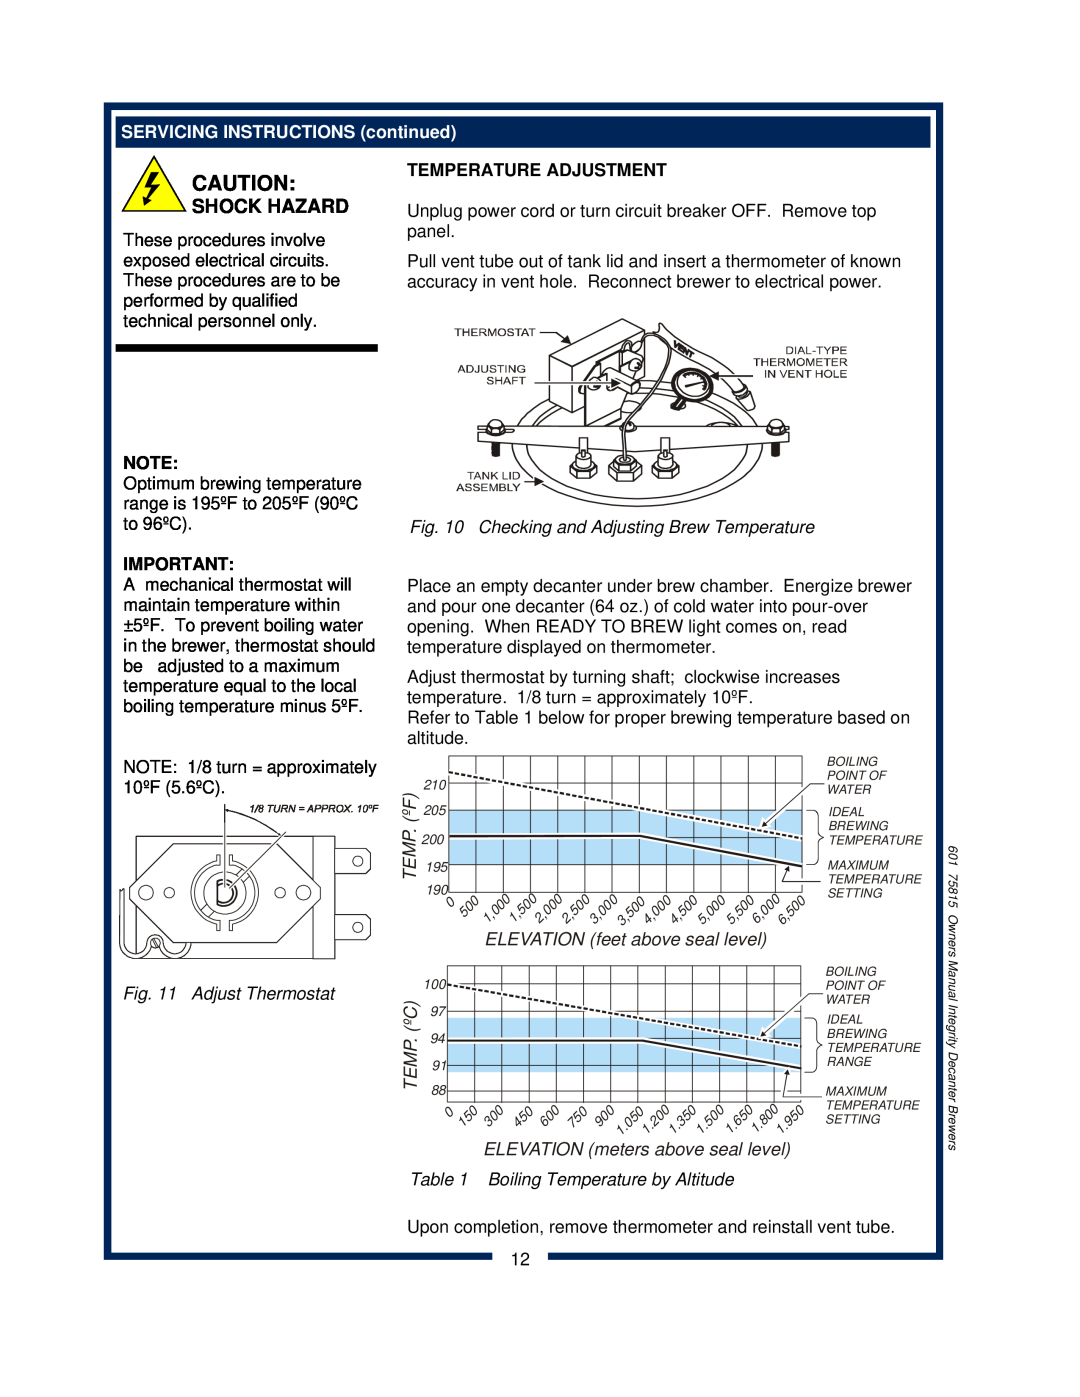 Bloomfield 9012, 9010, 9016 Shock Hazard, ELEVATION feet above seal level, Temp.ºc, SERVICING INSTRUCTIONS continued 